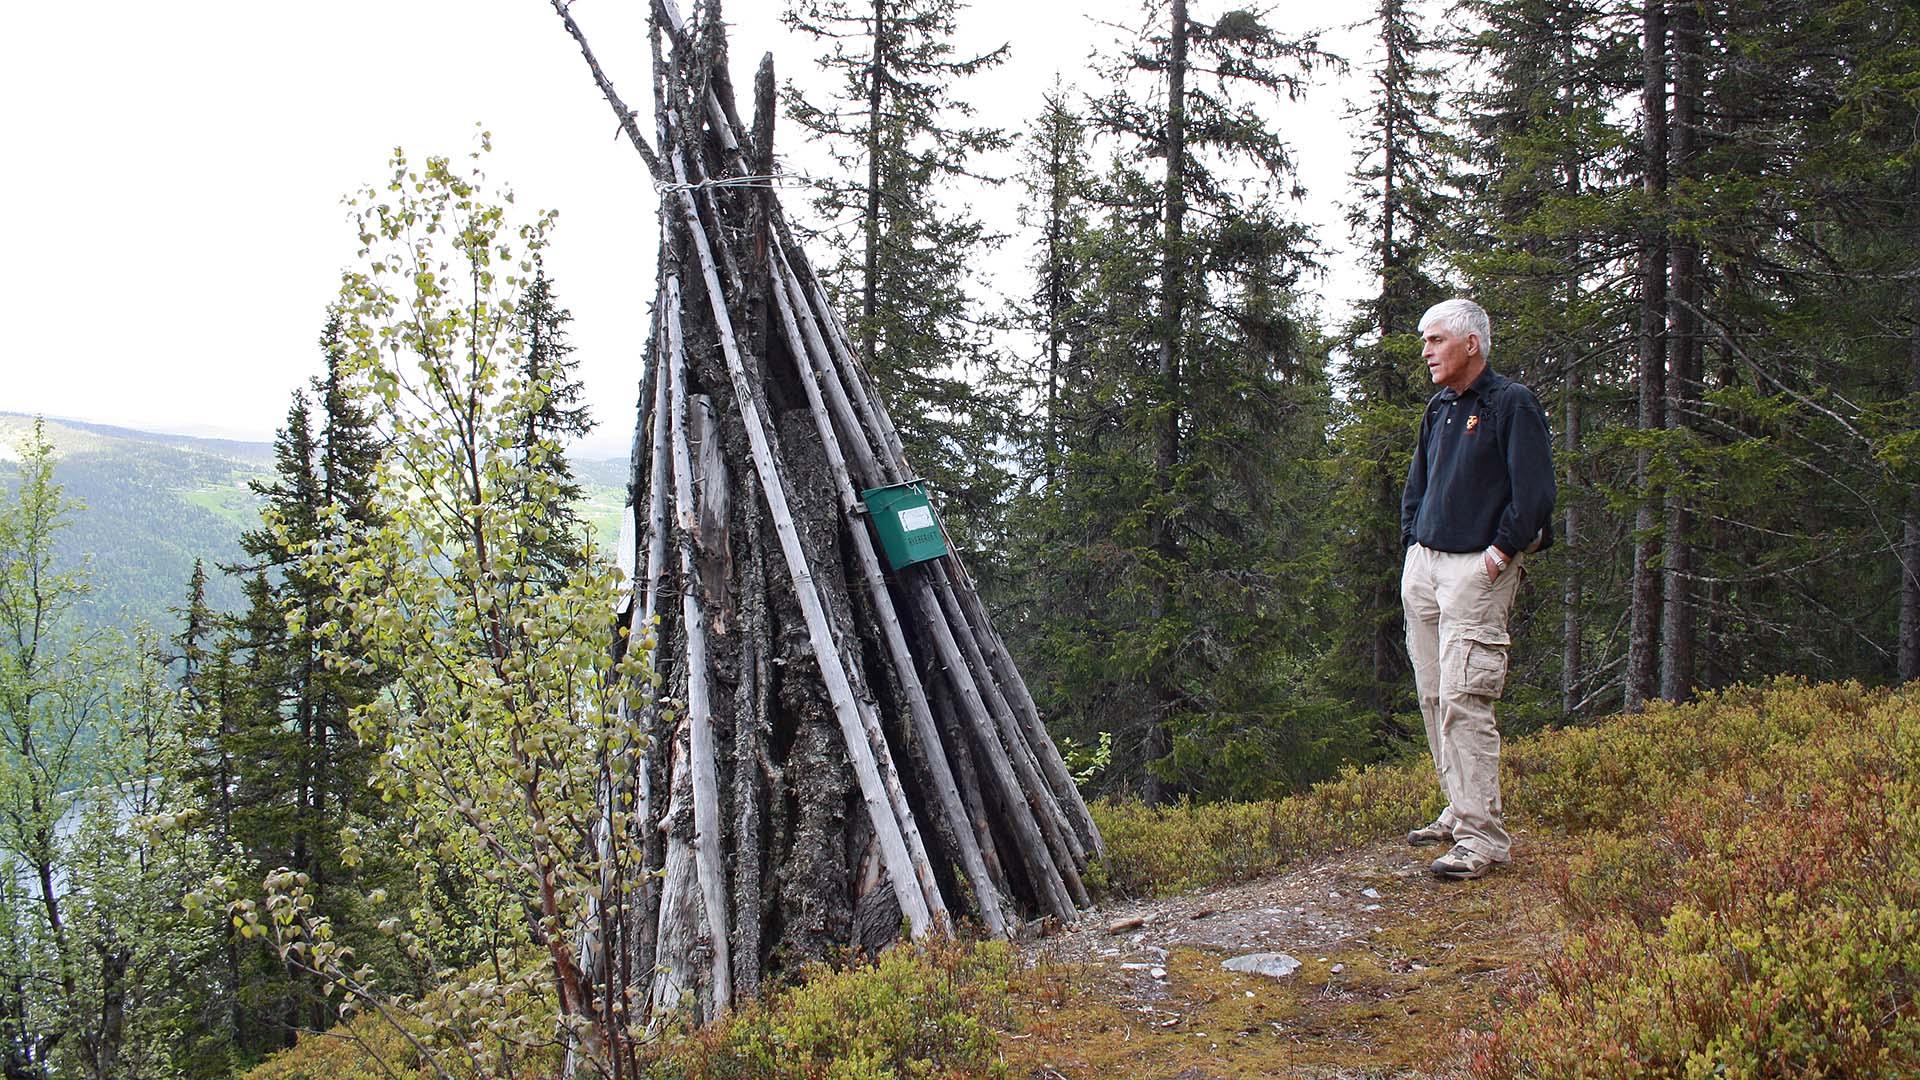 A man is standing next to a historical wooden beacon which is placed on an outcrop in a forested hillside.